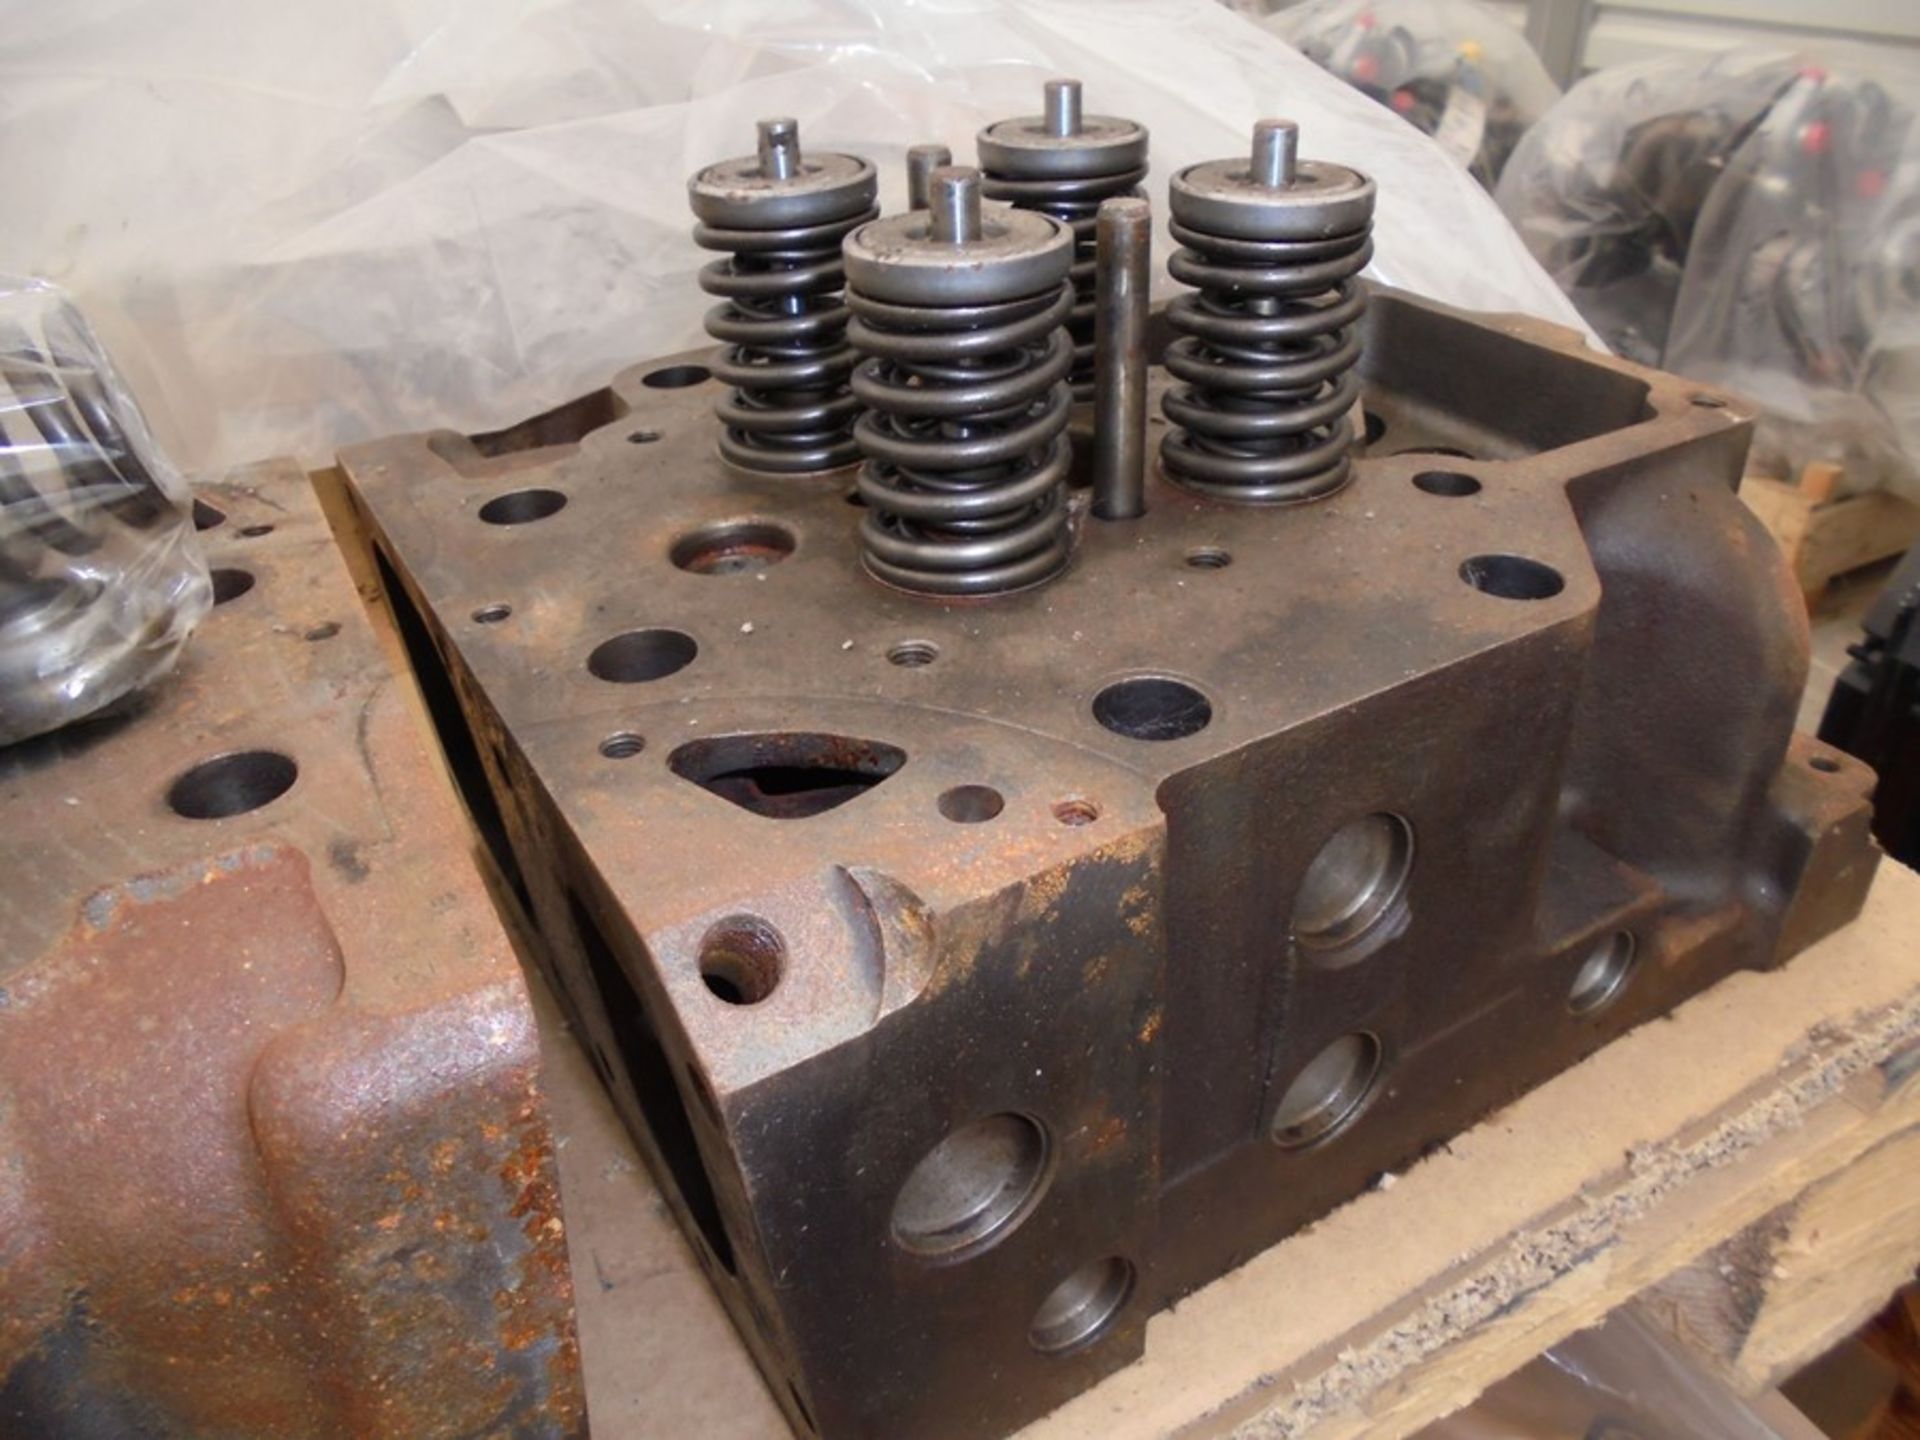 8 x used Caterpillar 3516 cylinder heads, part numbers 205-1560 and 20R3547 (mostly without valves).